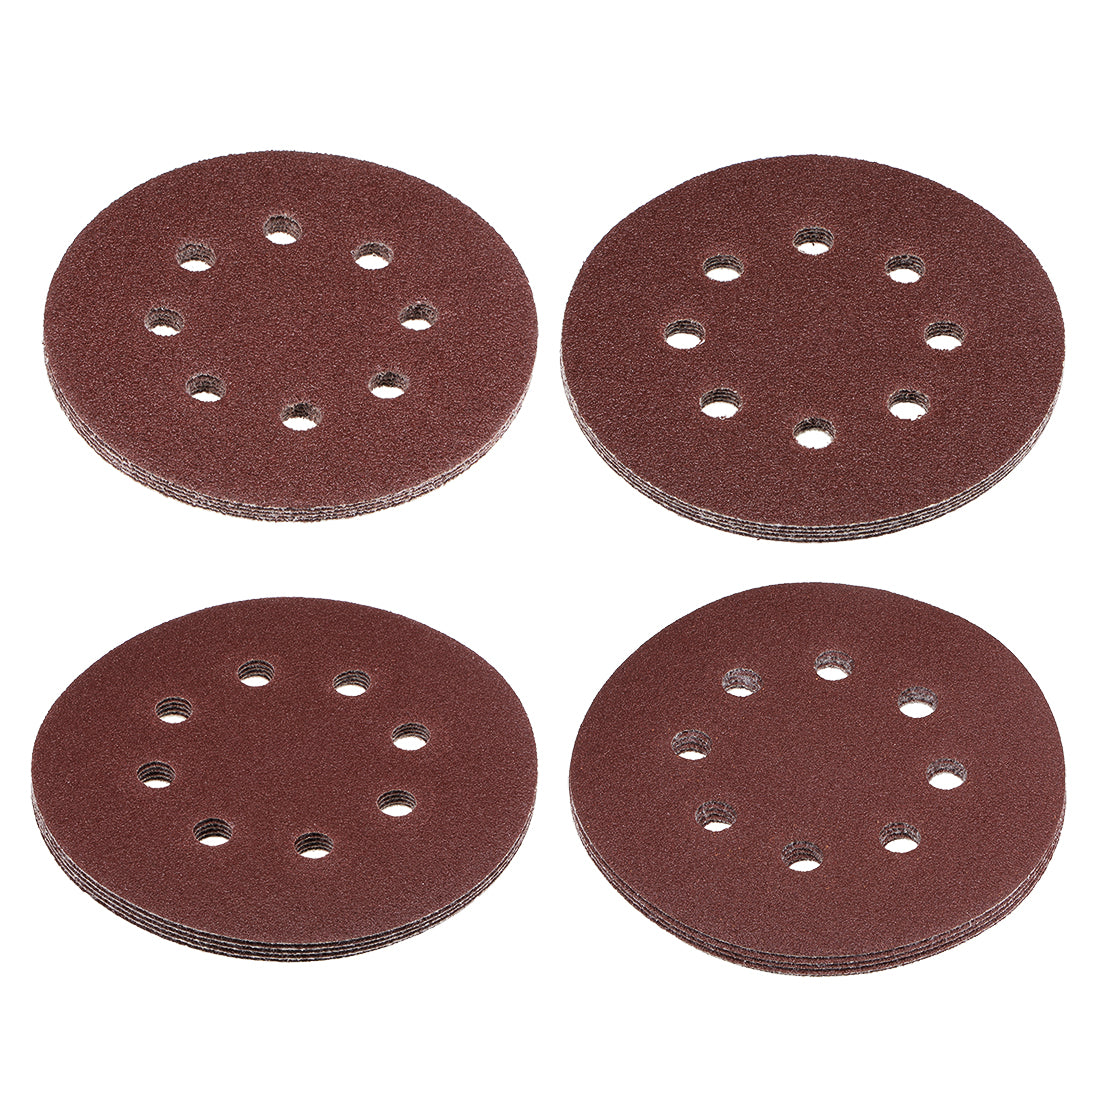 Uxcell Uxcell 20pcs 5 inch 8 Hole Sanding Disc 320/400/600/800 Grit